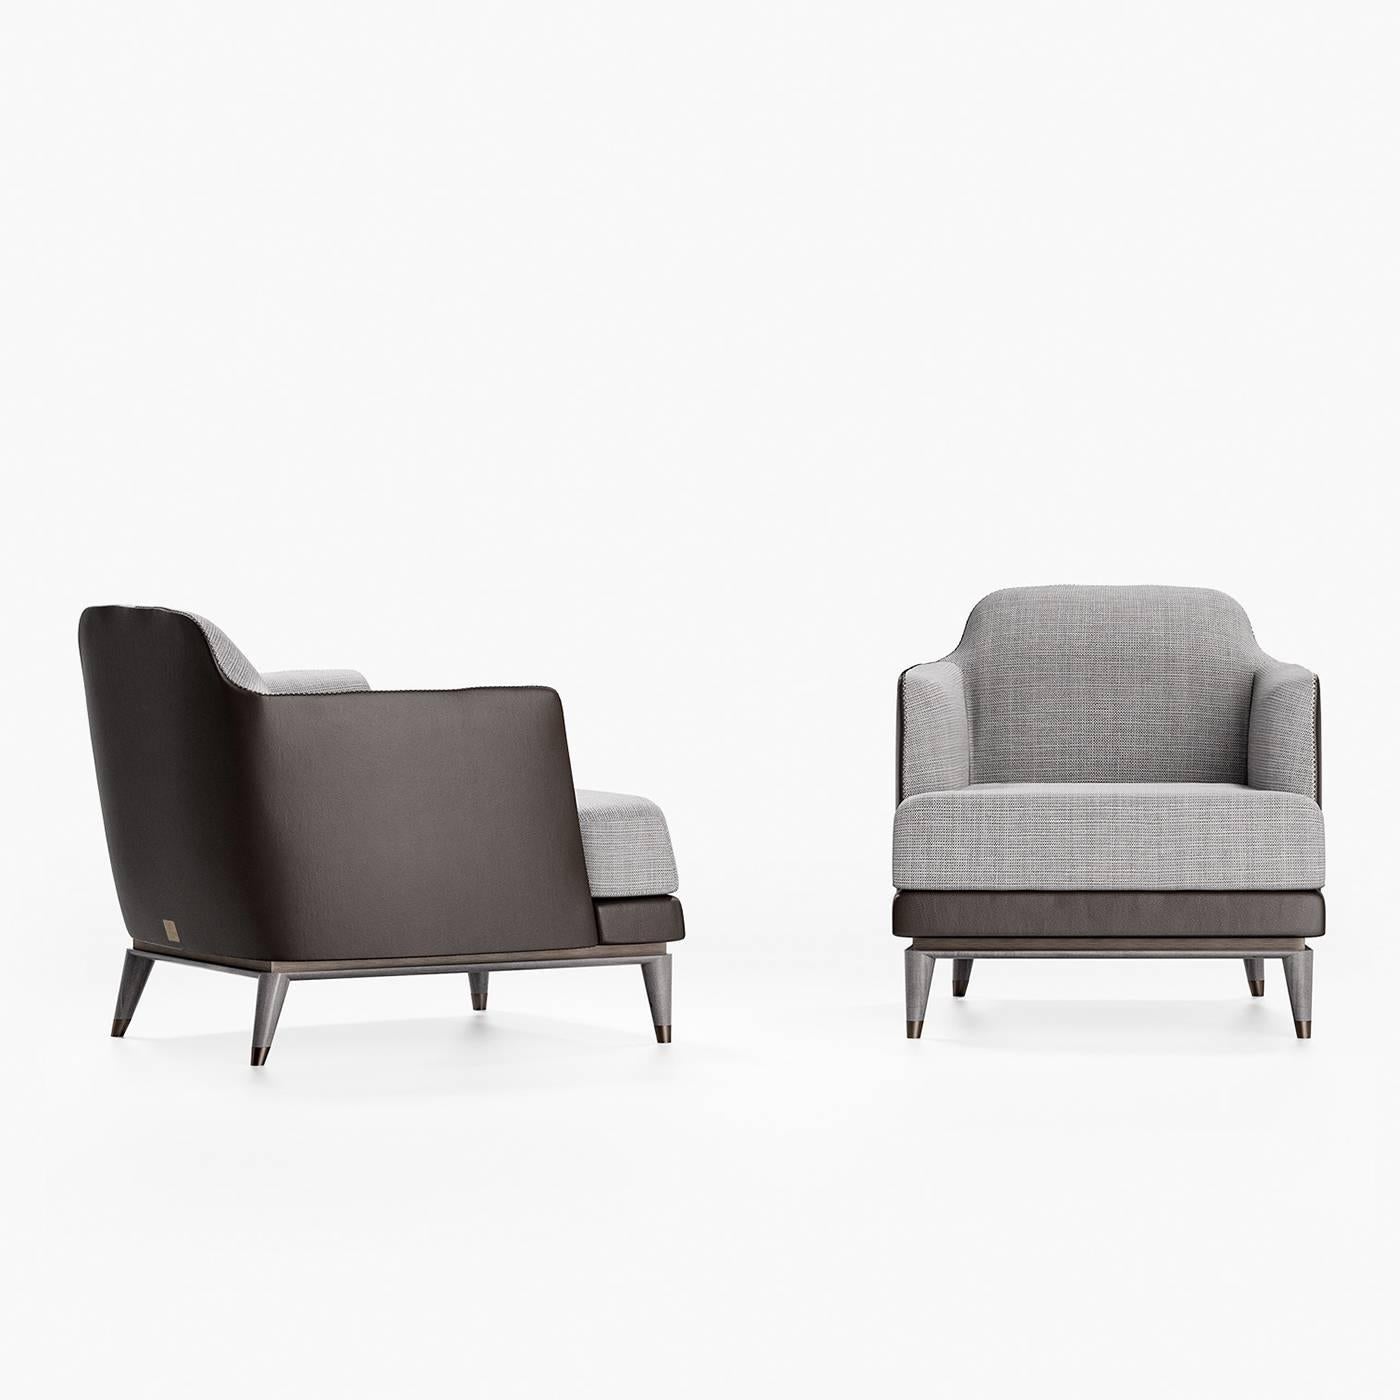 Simple yet bold, clean lines and block colors characterize this timeless occasional armchair. Featuring a deep seat and closed armrests, this elegant piece is upholstered with gray fabric on the inside and black leather on the outside and base,